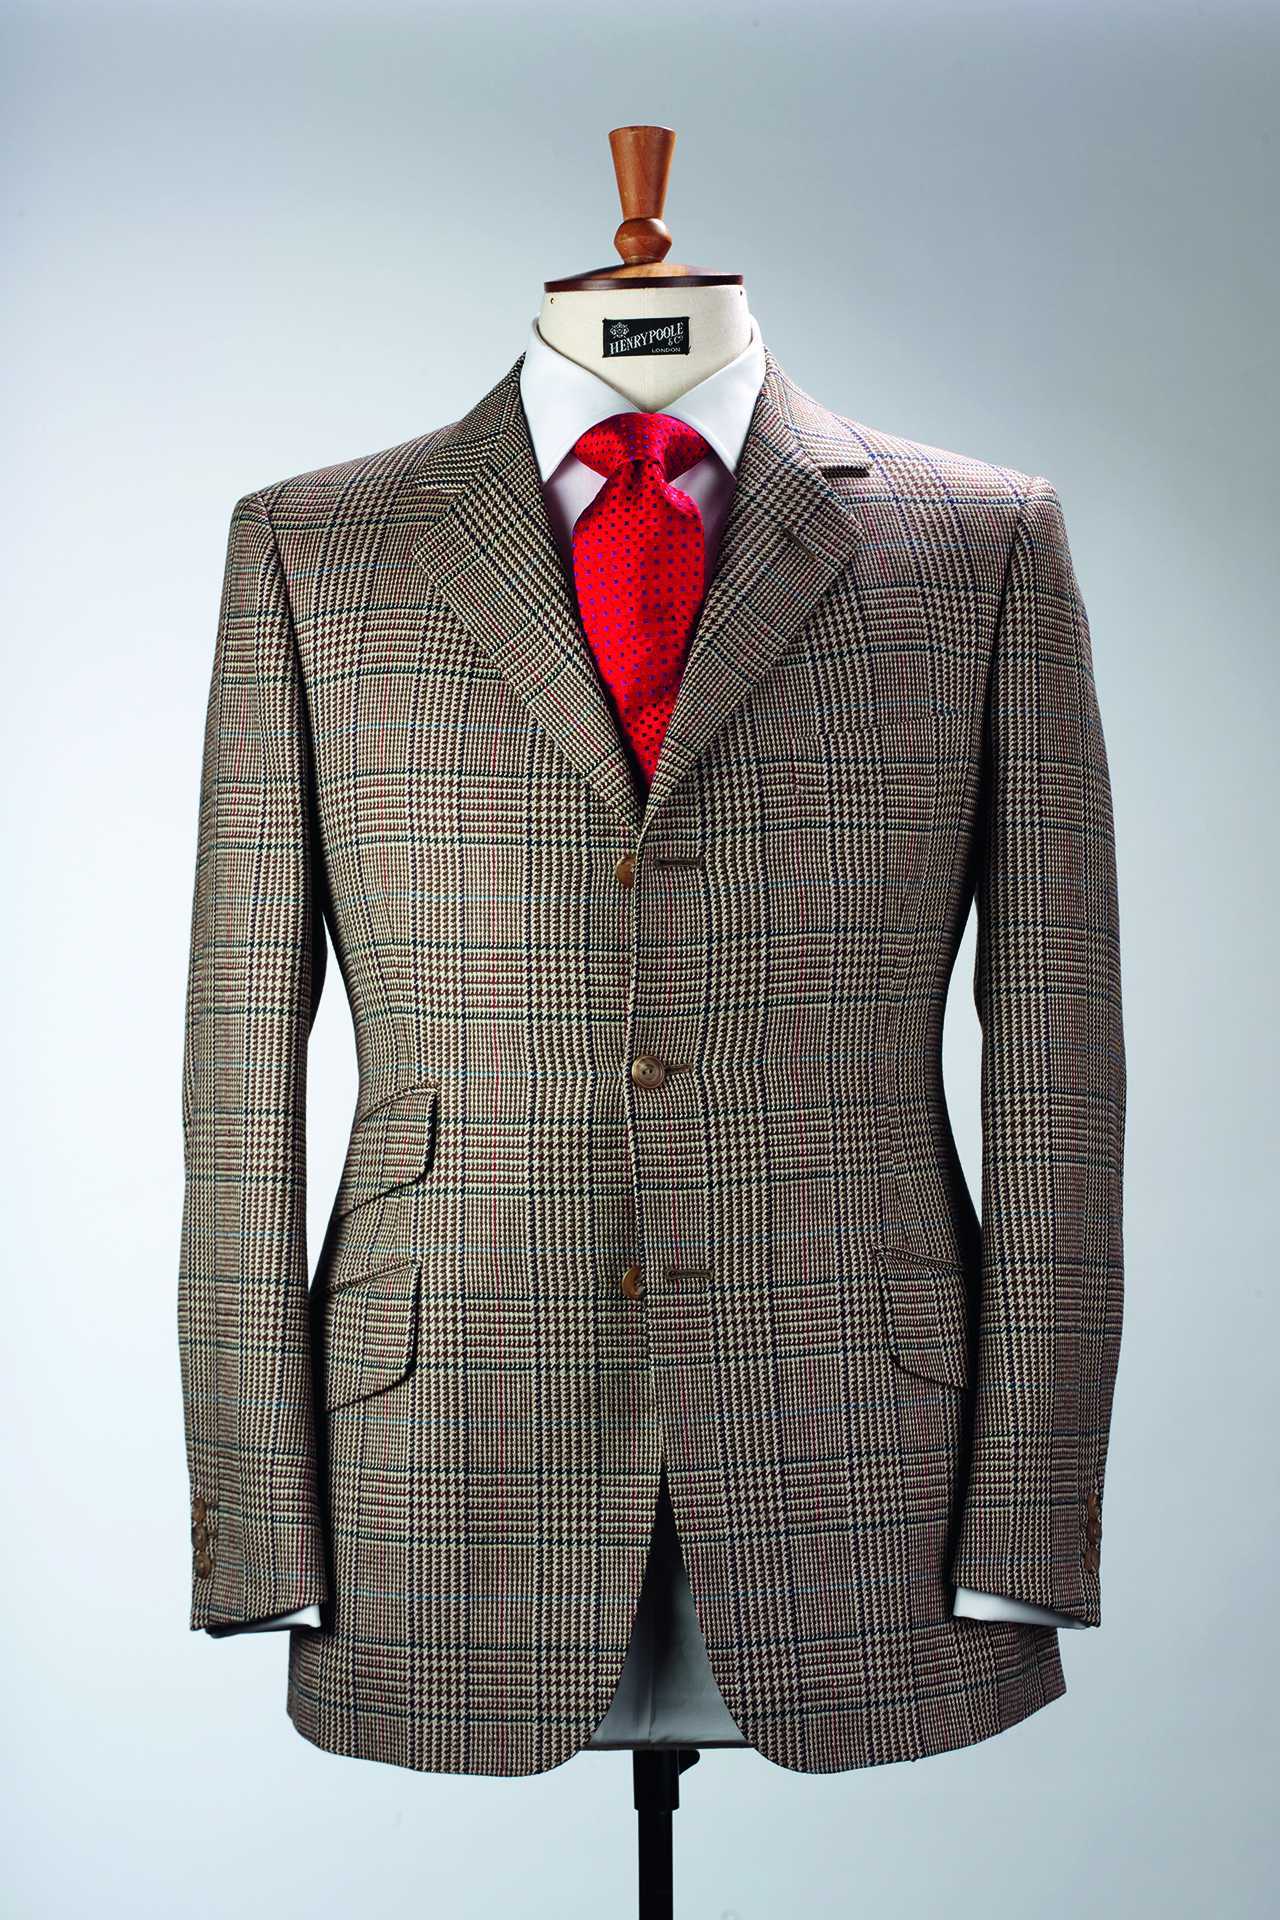 Seafield check from Henry Poole